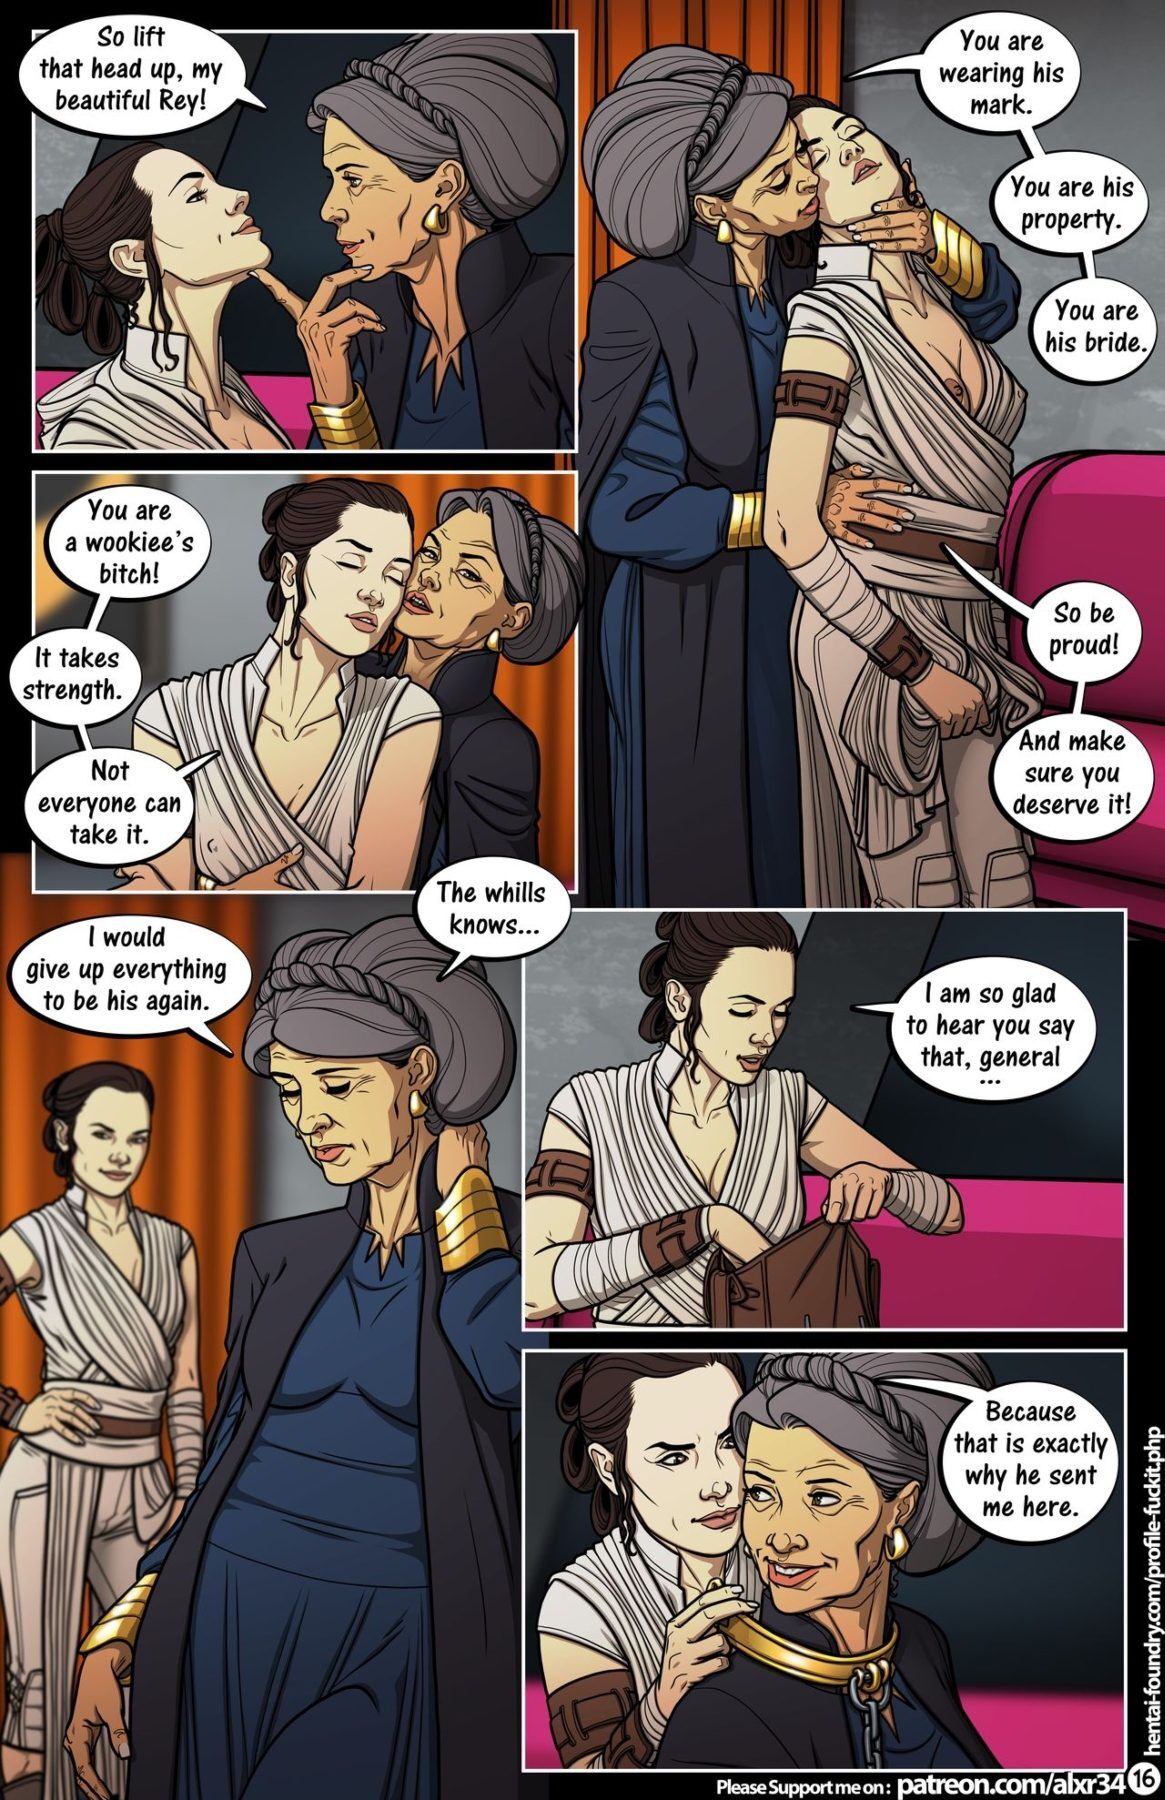 Sexy Star Wars Sex Toons - A Complete Guide to Wookie Sex 3 - Star Wars by Fuckit - FreeAdultComix